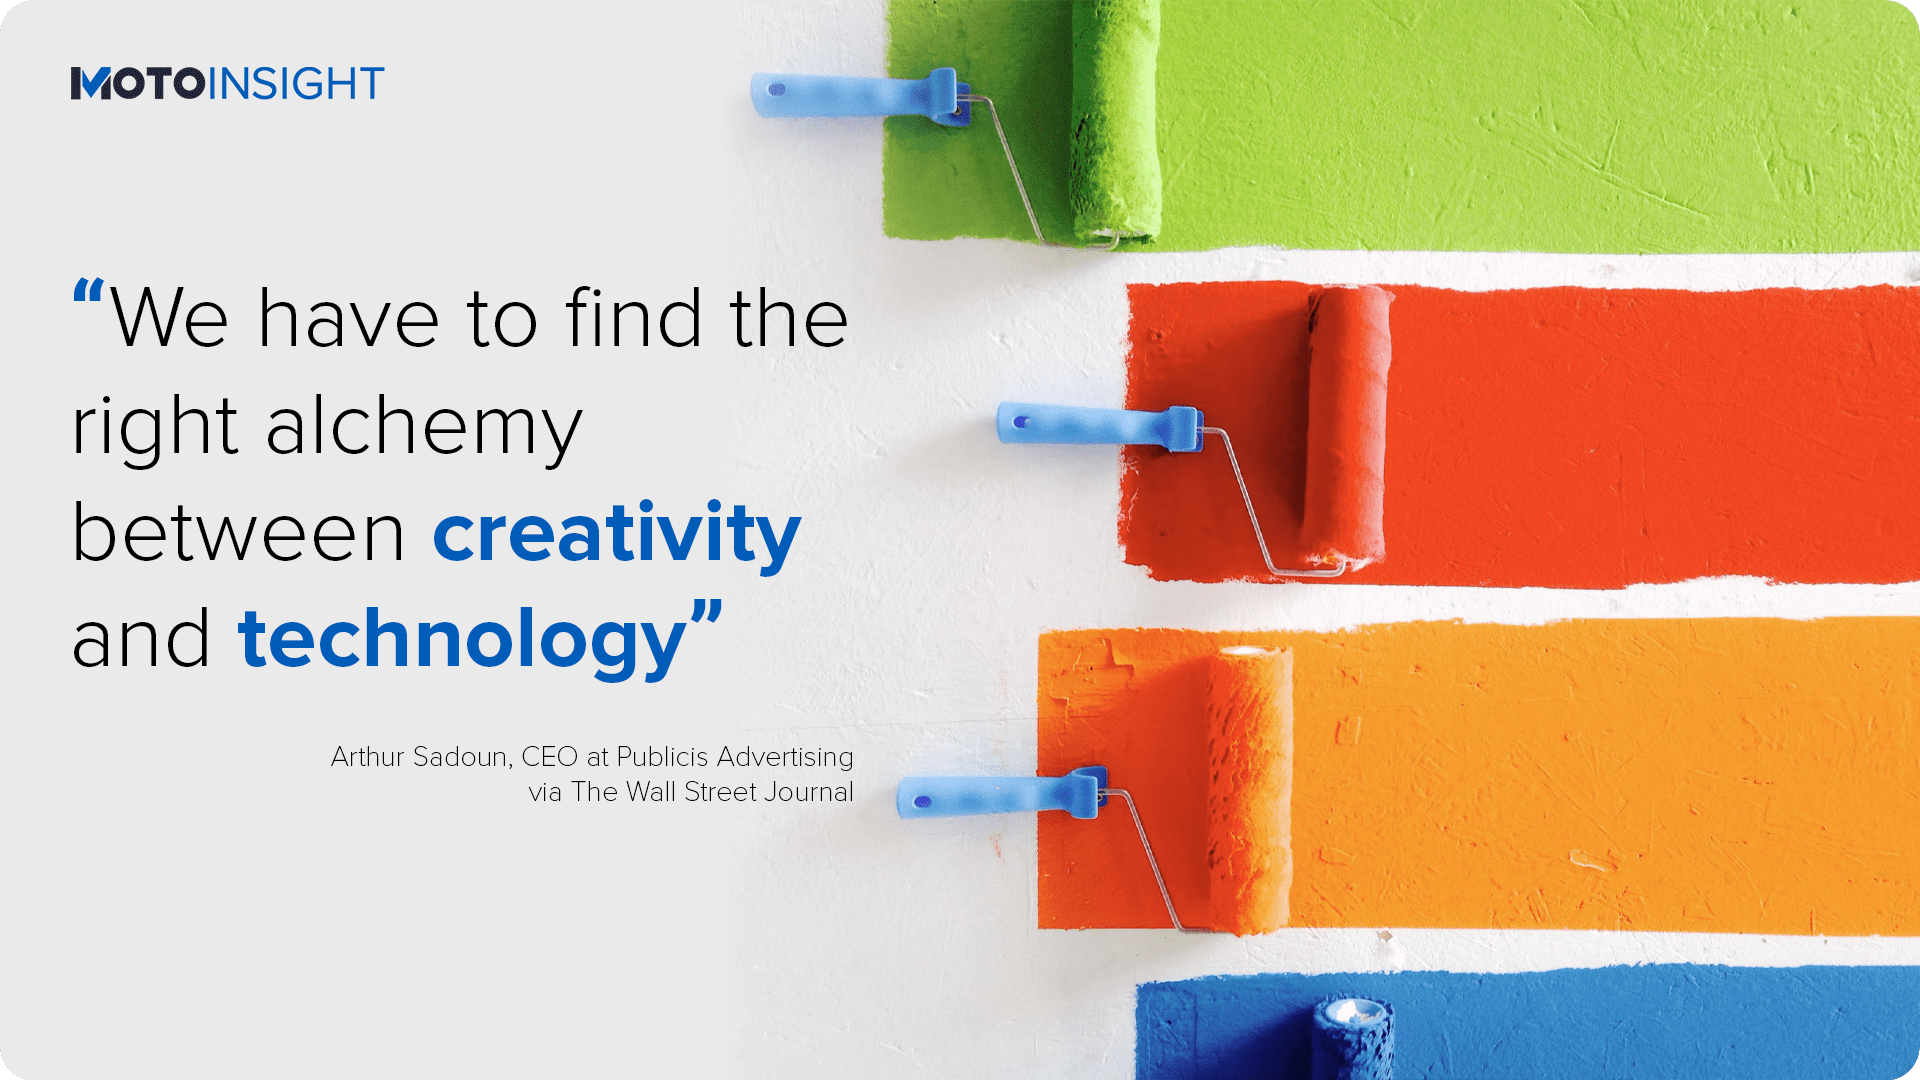 “We have to find the right alchemy between creativity and technology” Wall Street Journal